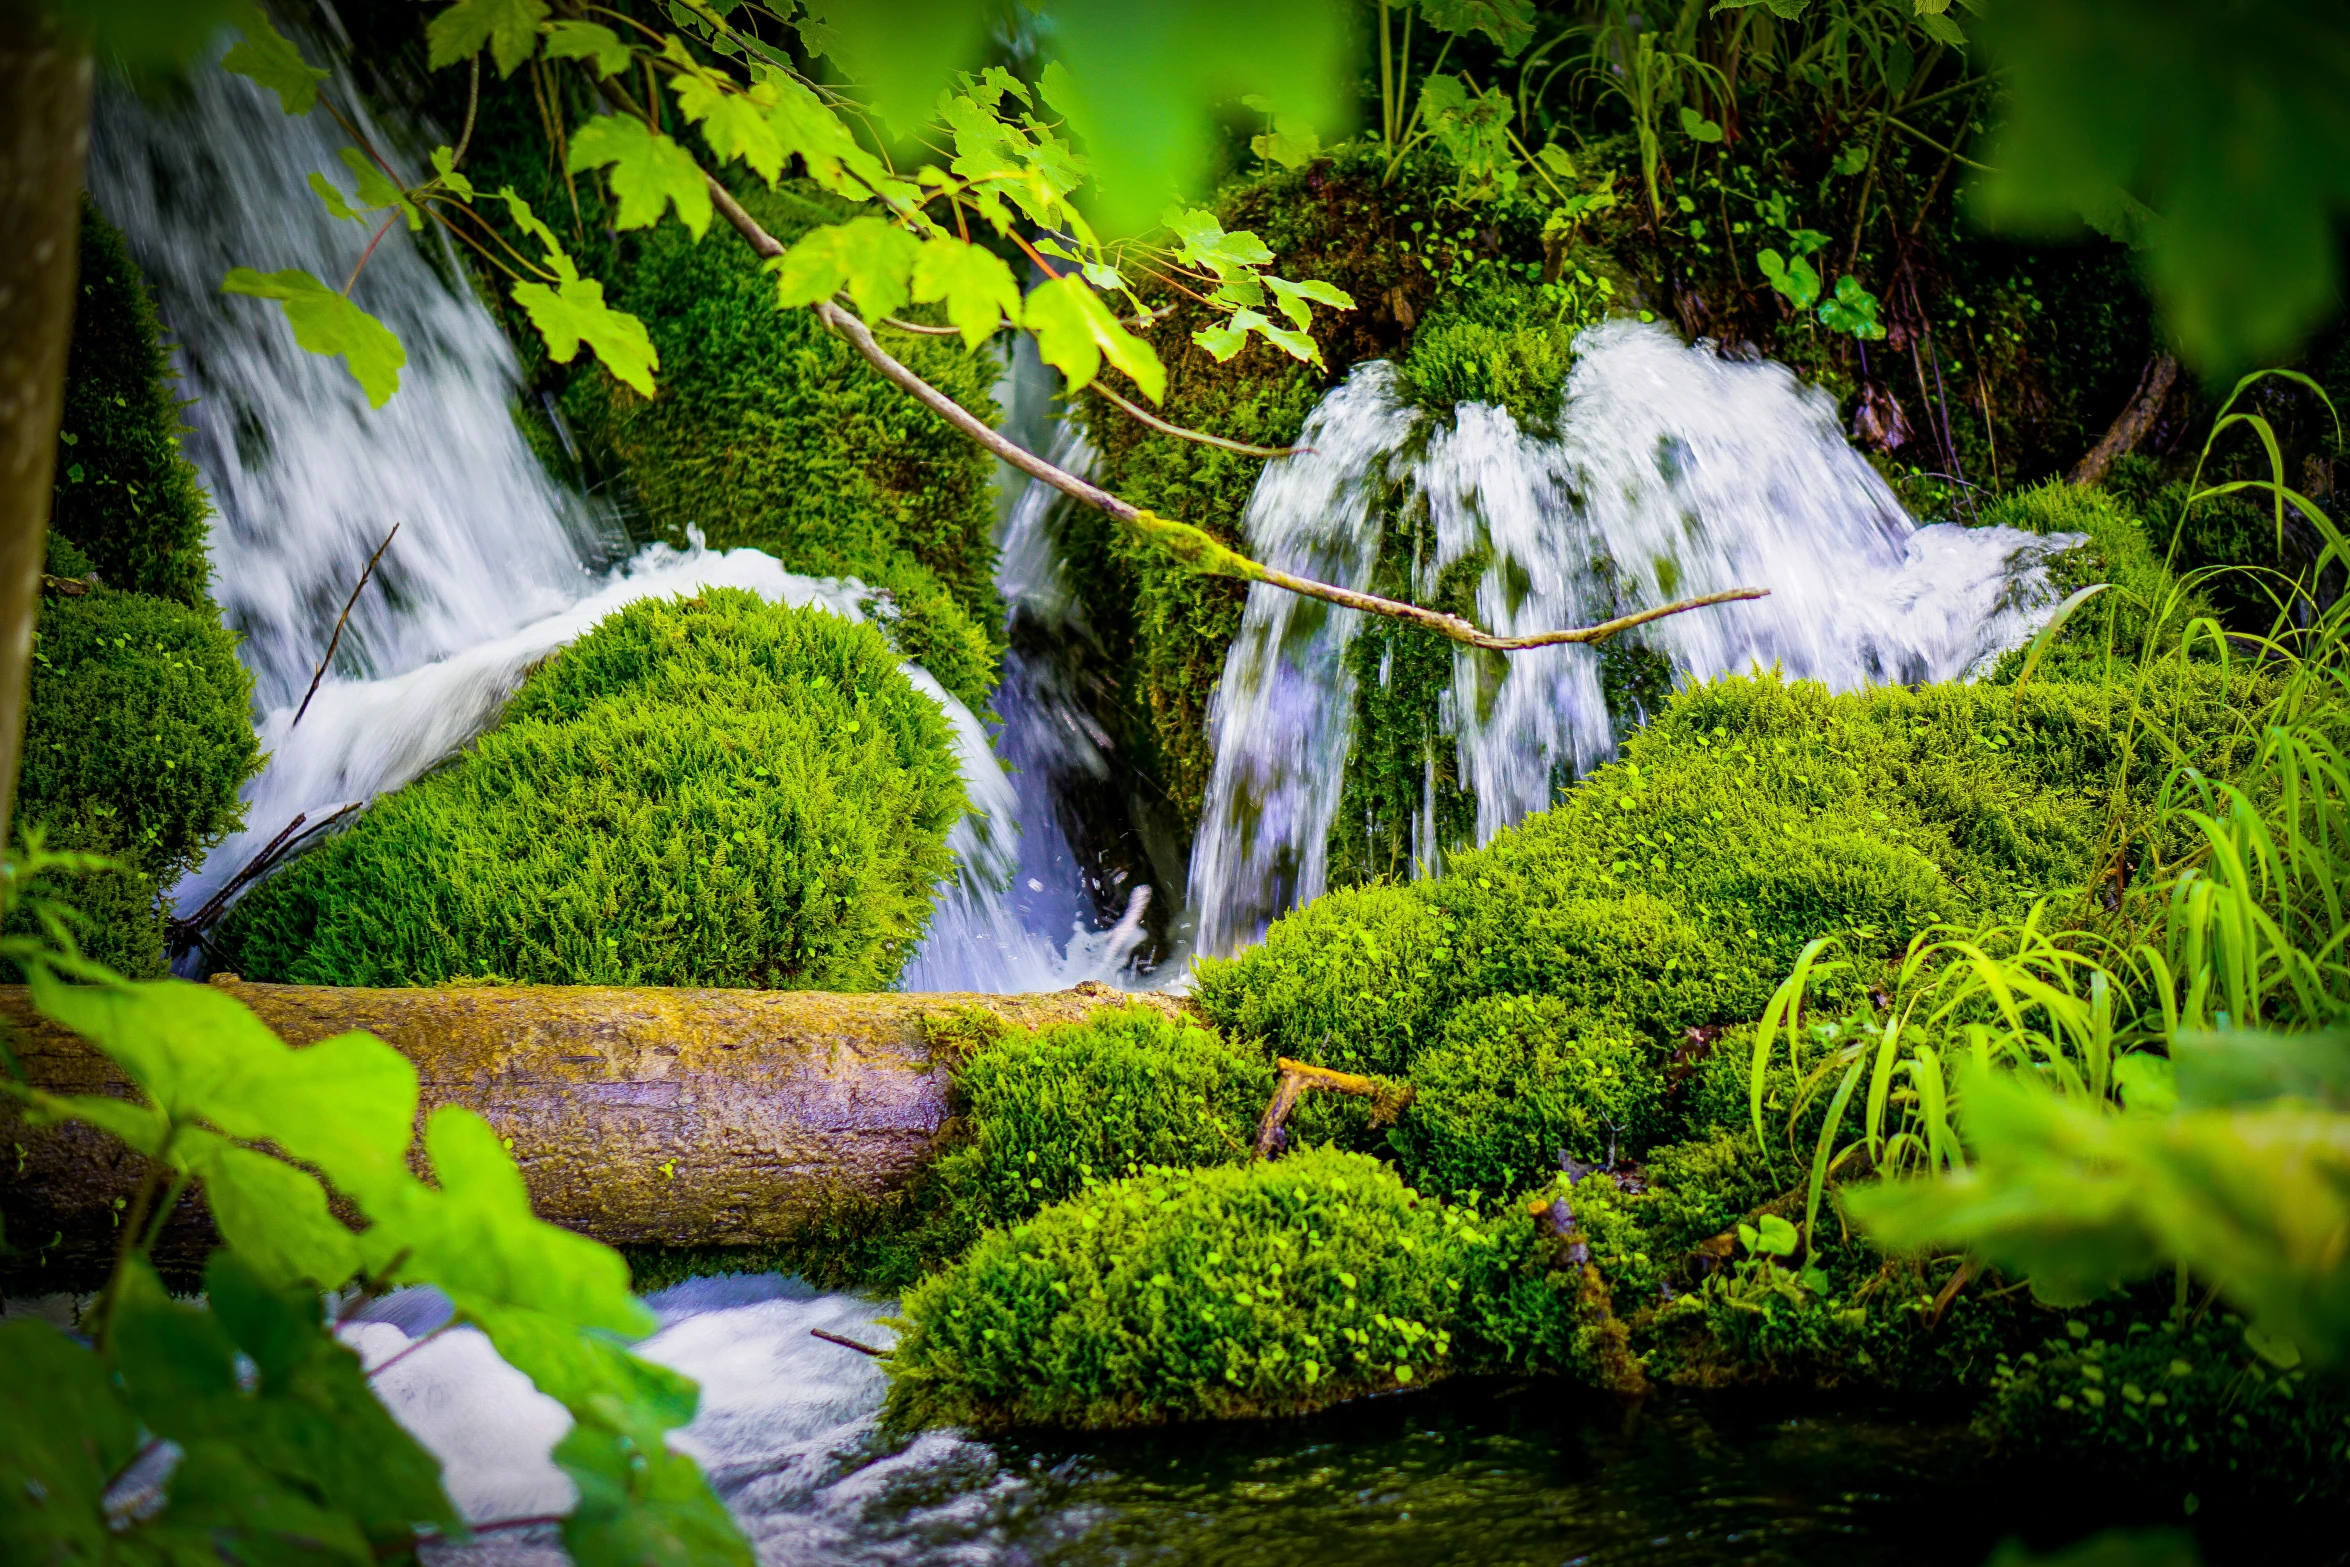 green moss growing around a waterfall in a forest